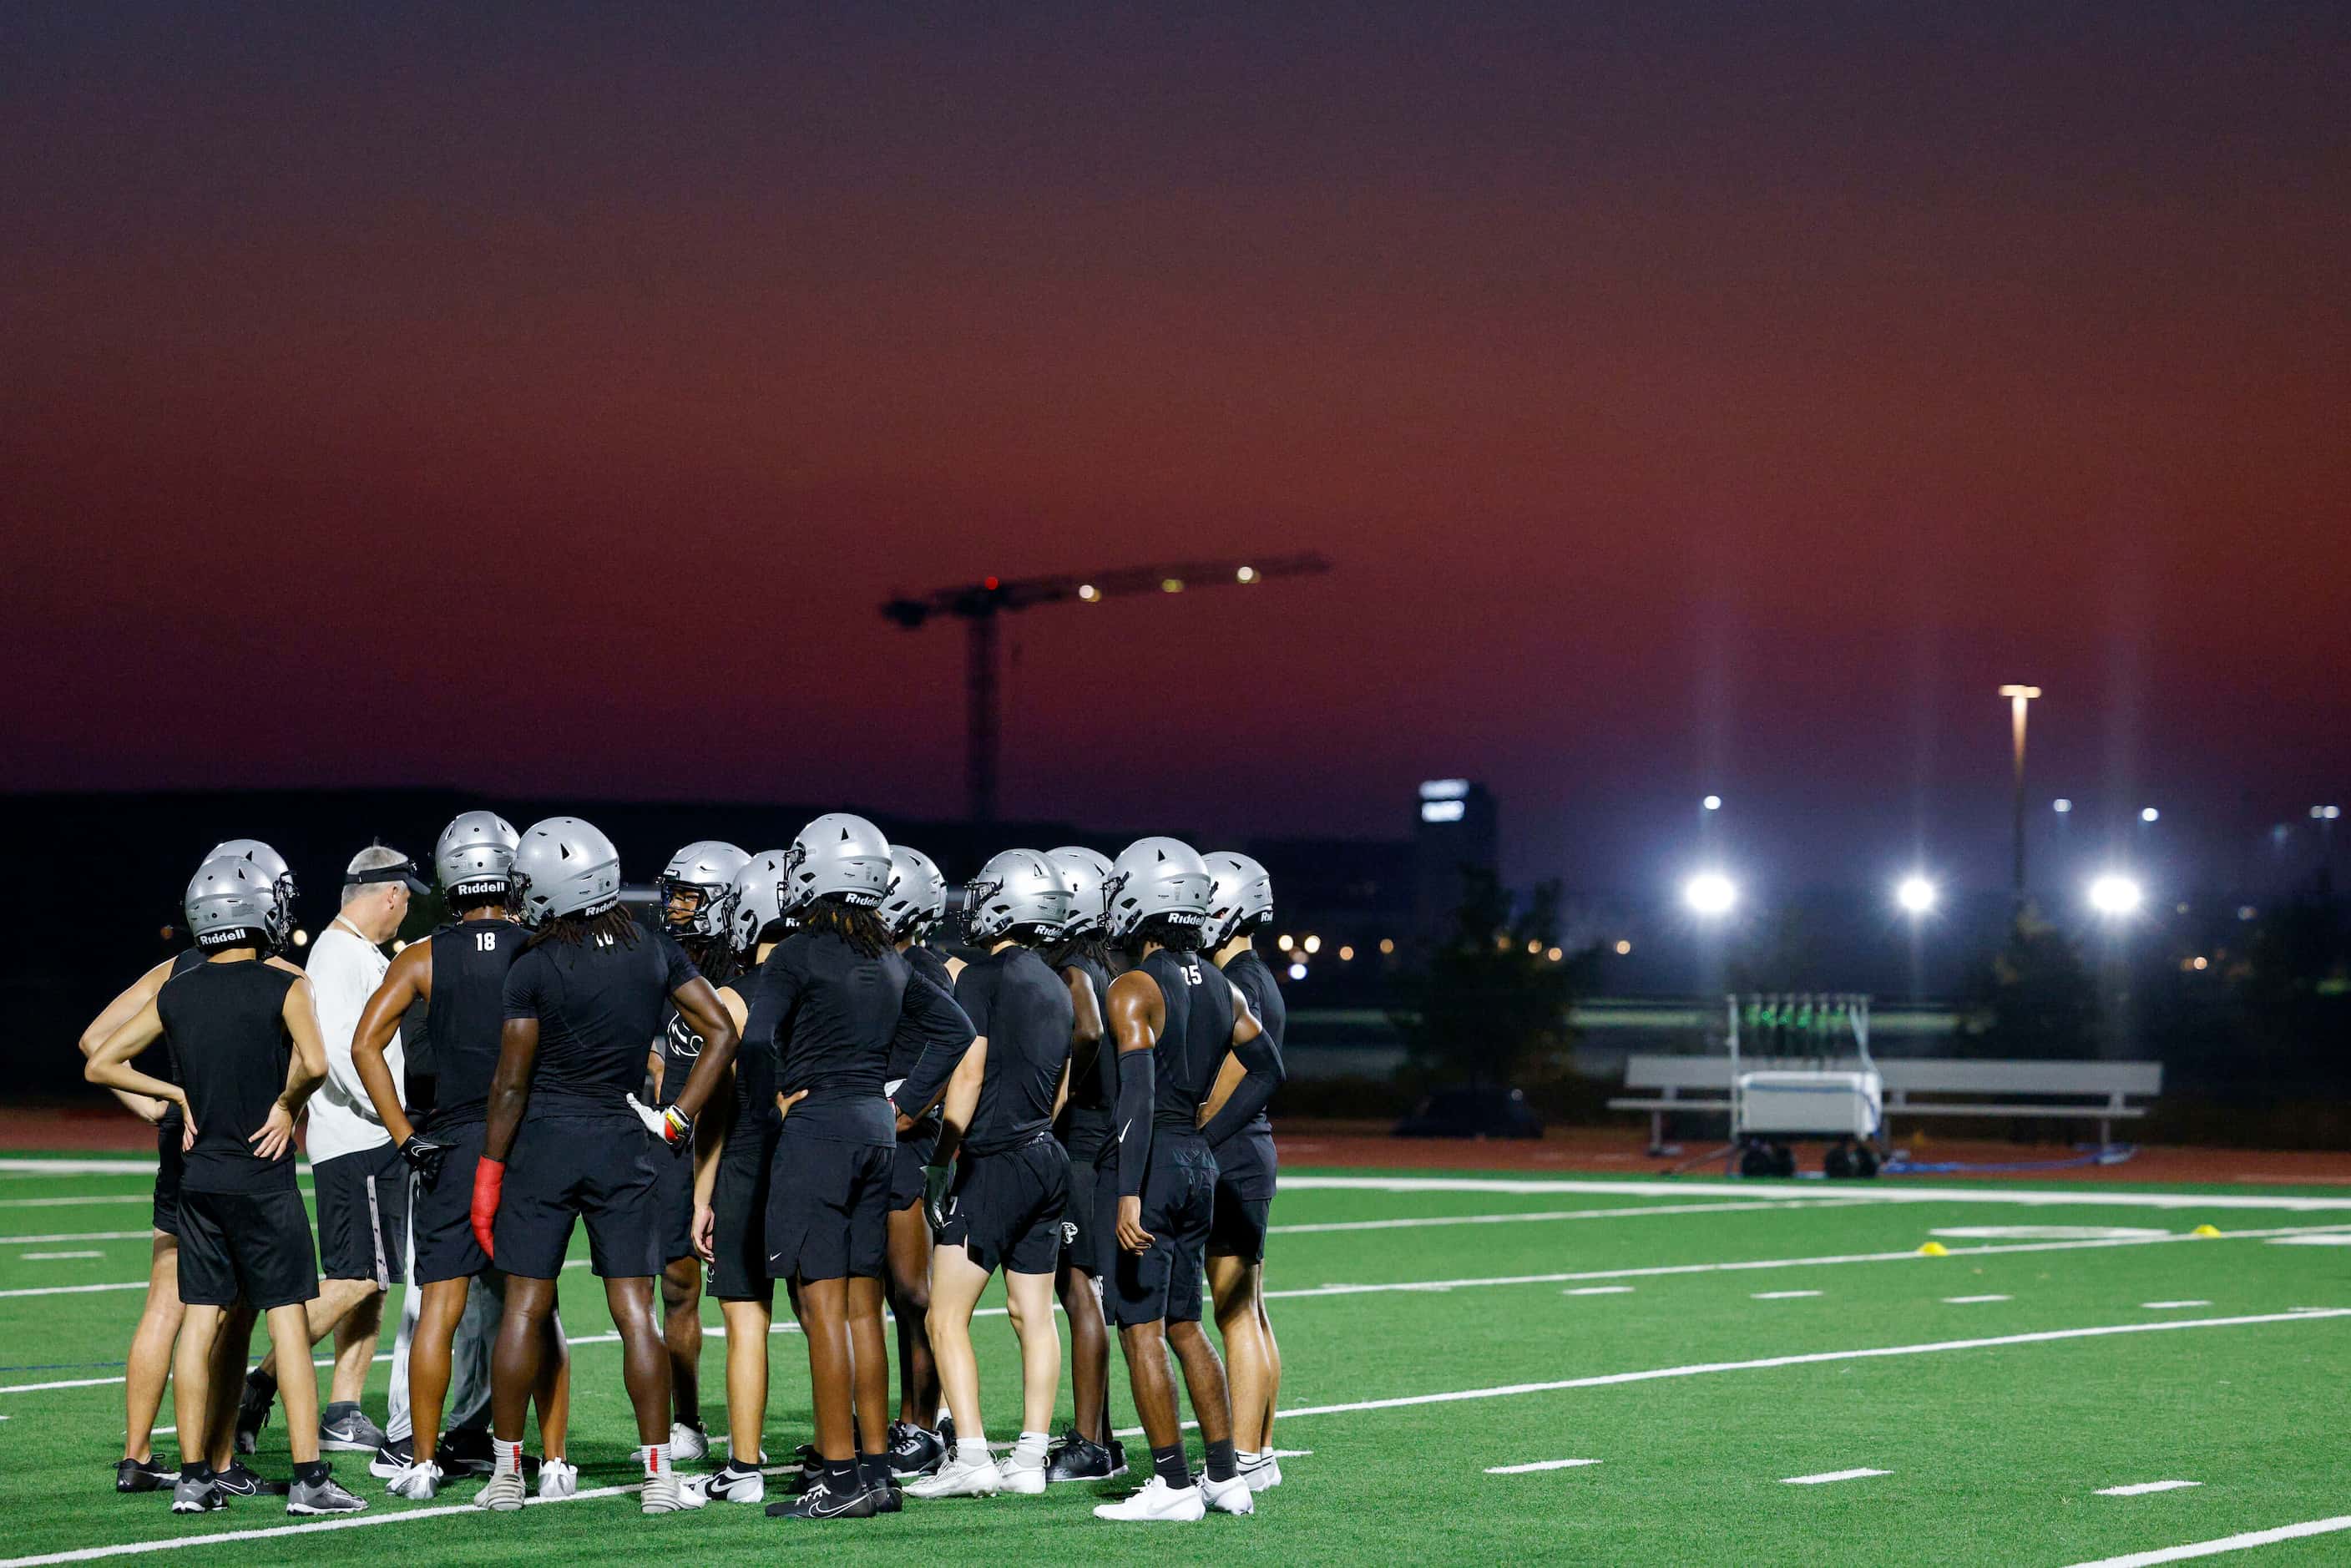 Players huddle on the field during a football practice before sunrise at Panther Creek High...